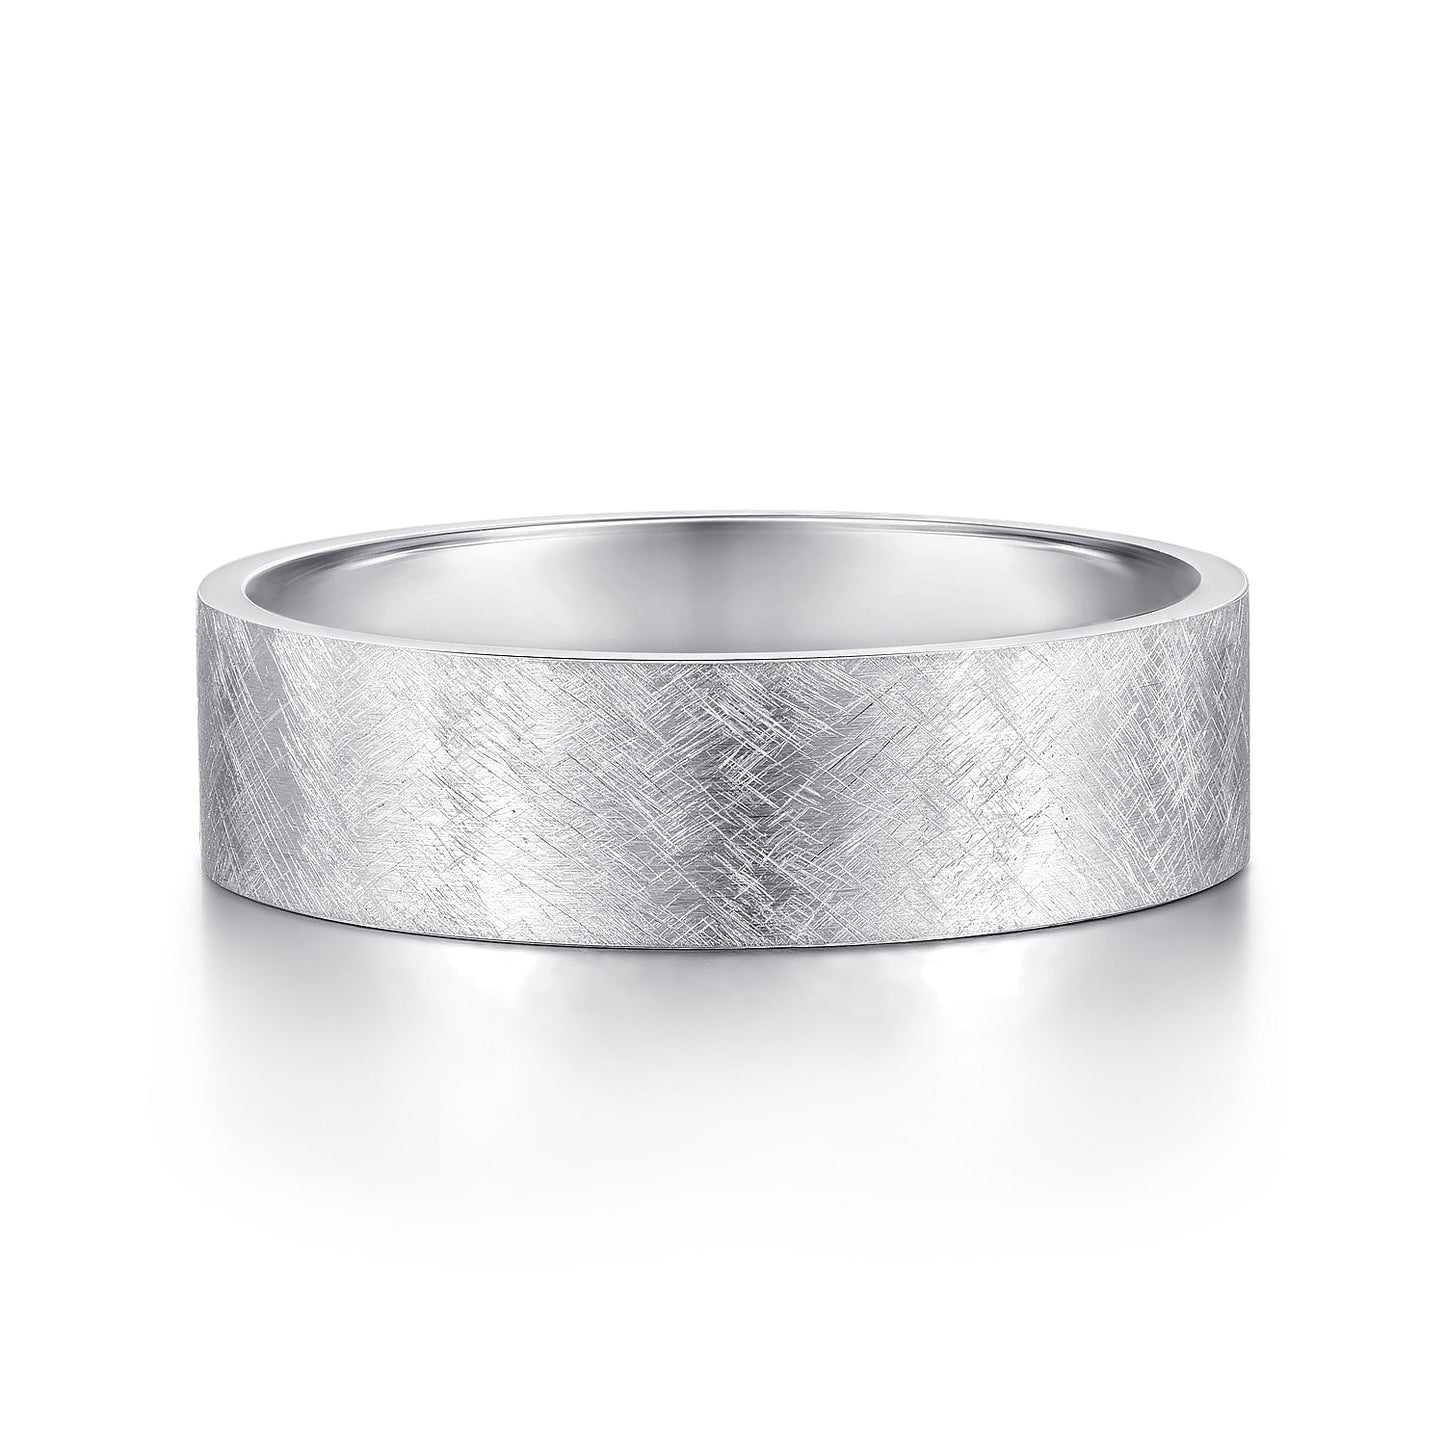 Gabriel & Co White Gold Wedding Band With A Brushed Finish - Gold Wedding Bands - Men's